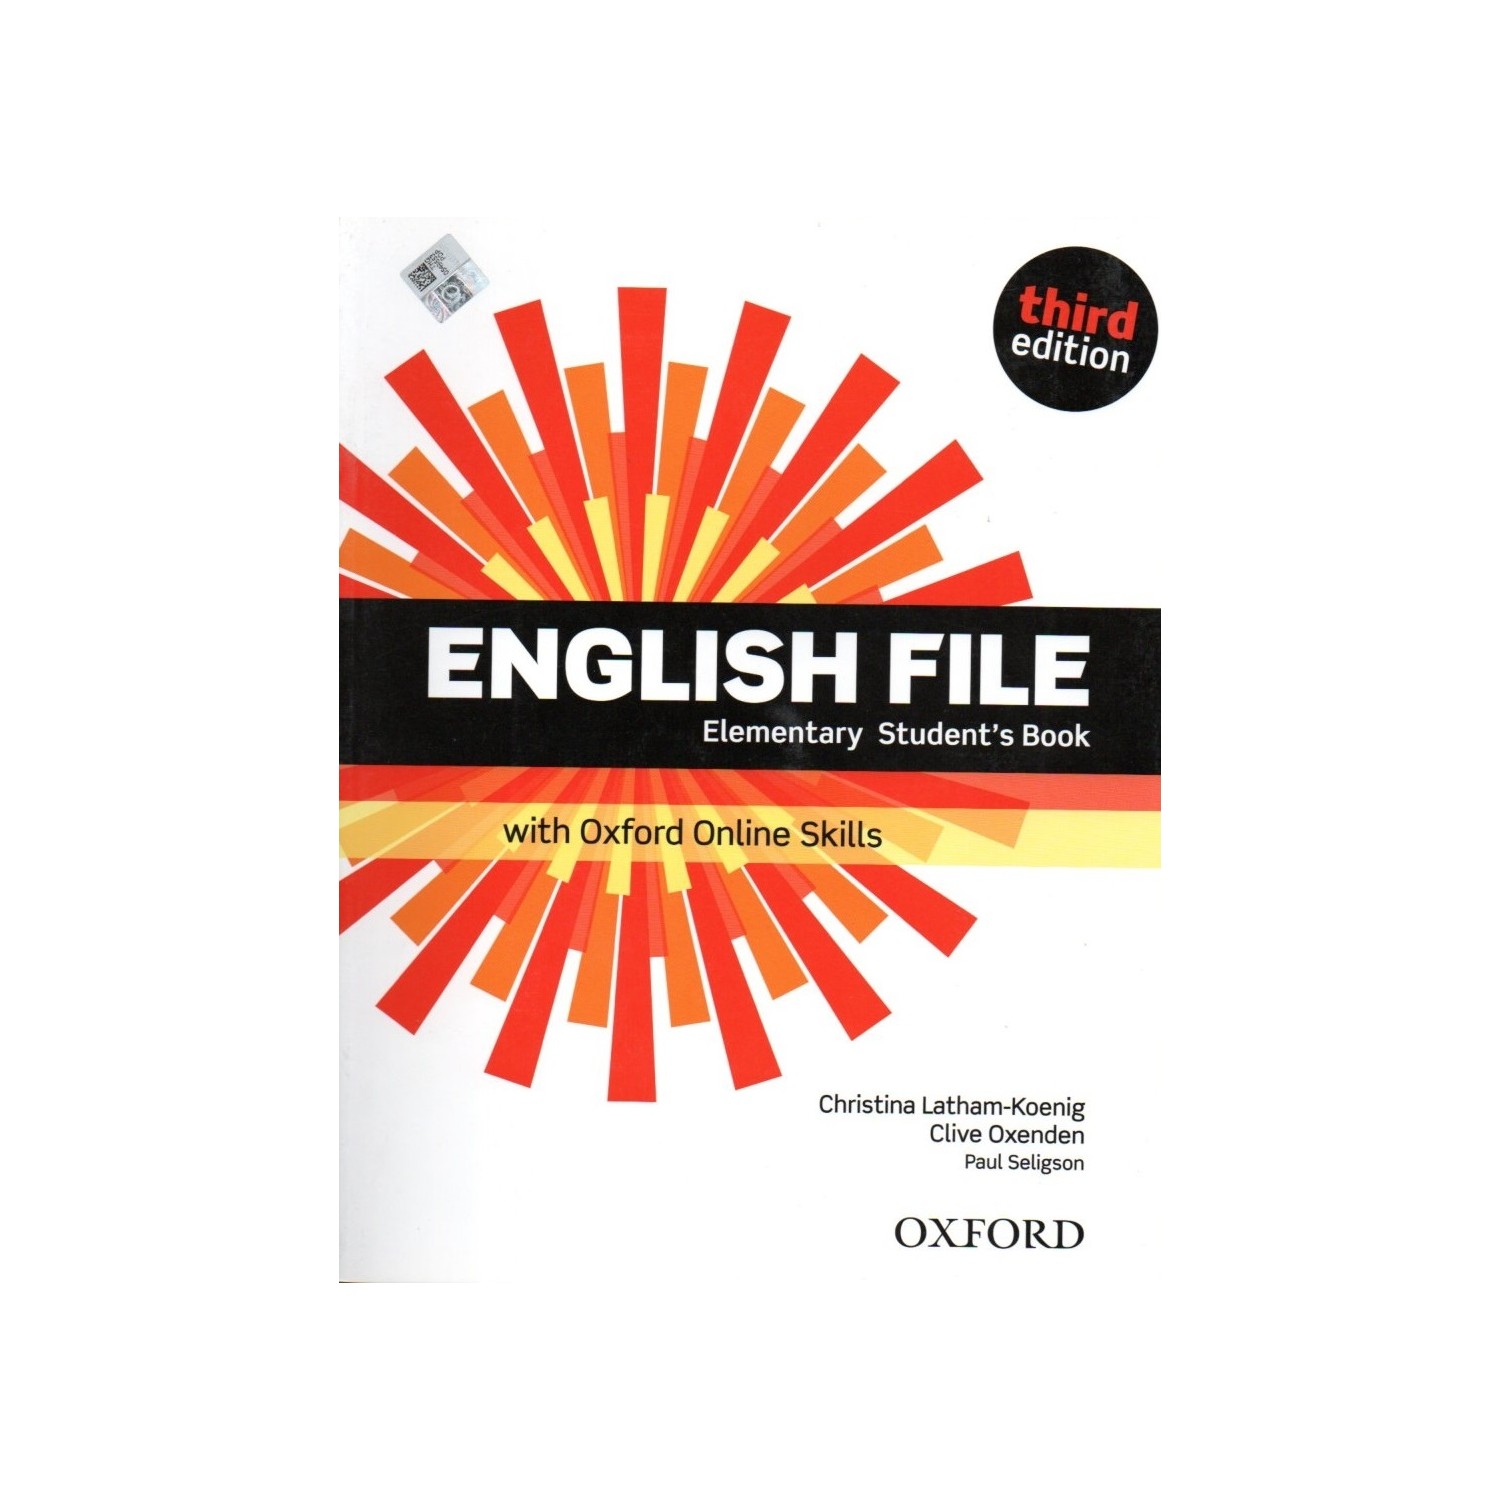 English file elementary 3rd edition. New English file Elementary третье издание. Учебник English file Elementary. English file Elementary student's book. English file 3 Elementary.